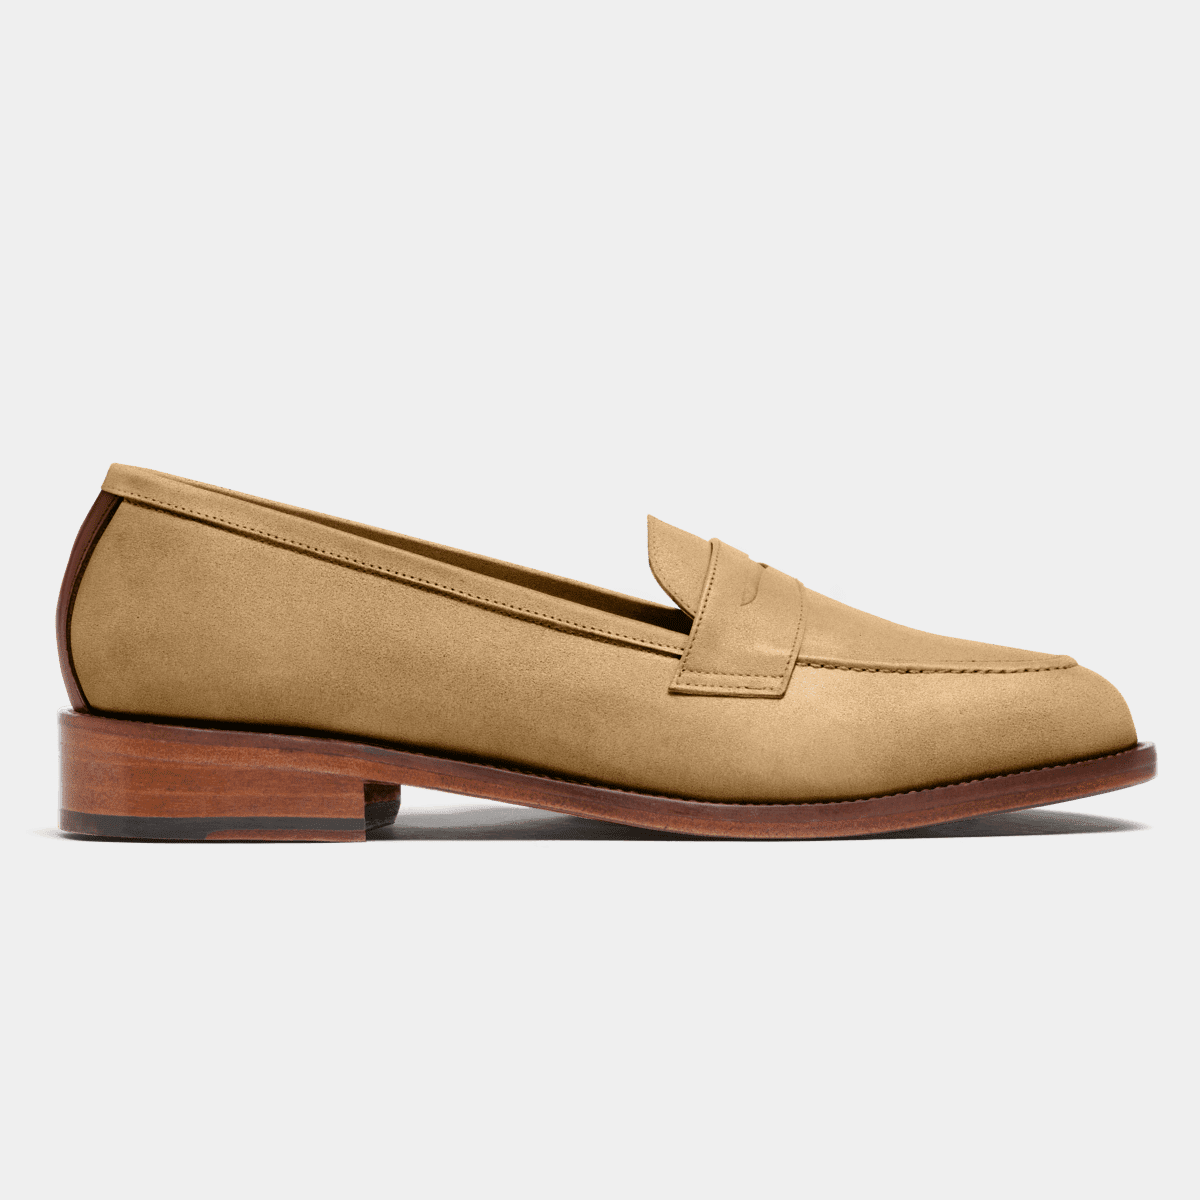 Penny Loafers for Men - Hockerty